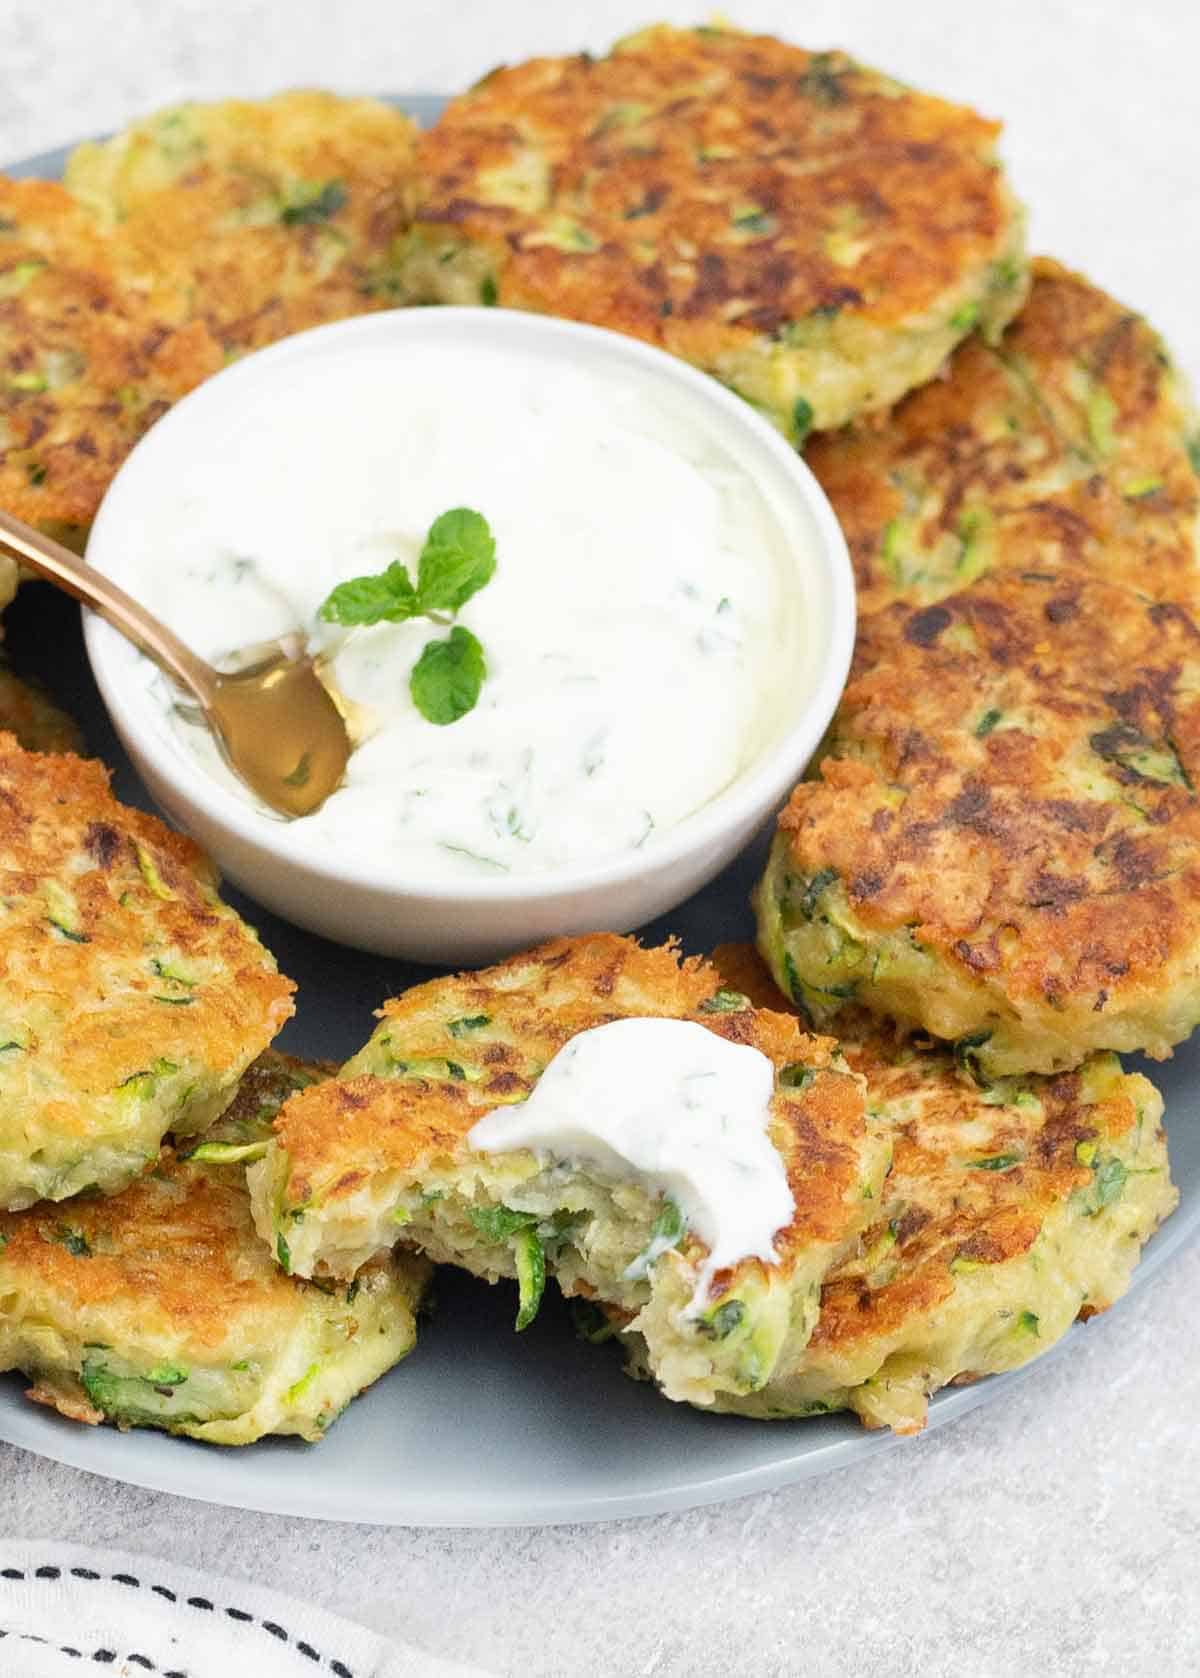 one of the Cheesy Courgette Fritters dipped in the yogurt sauce